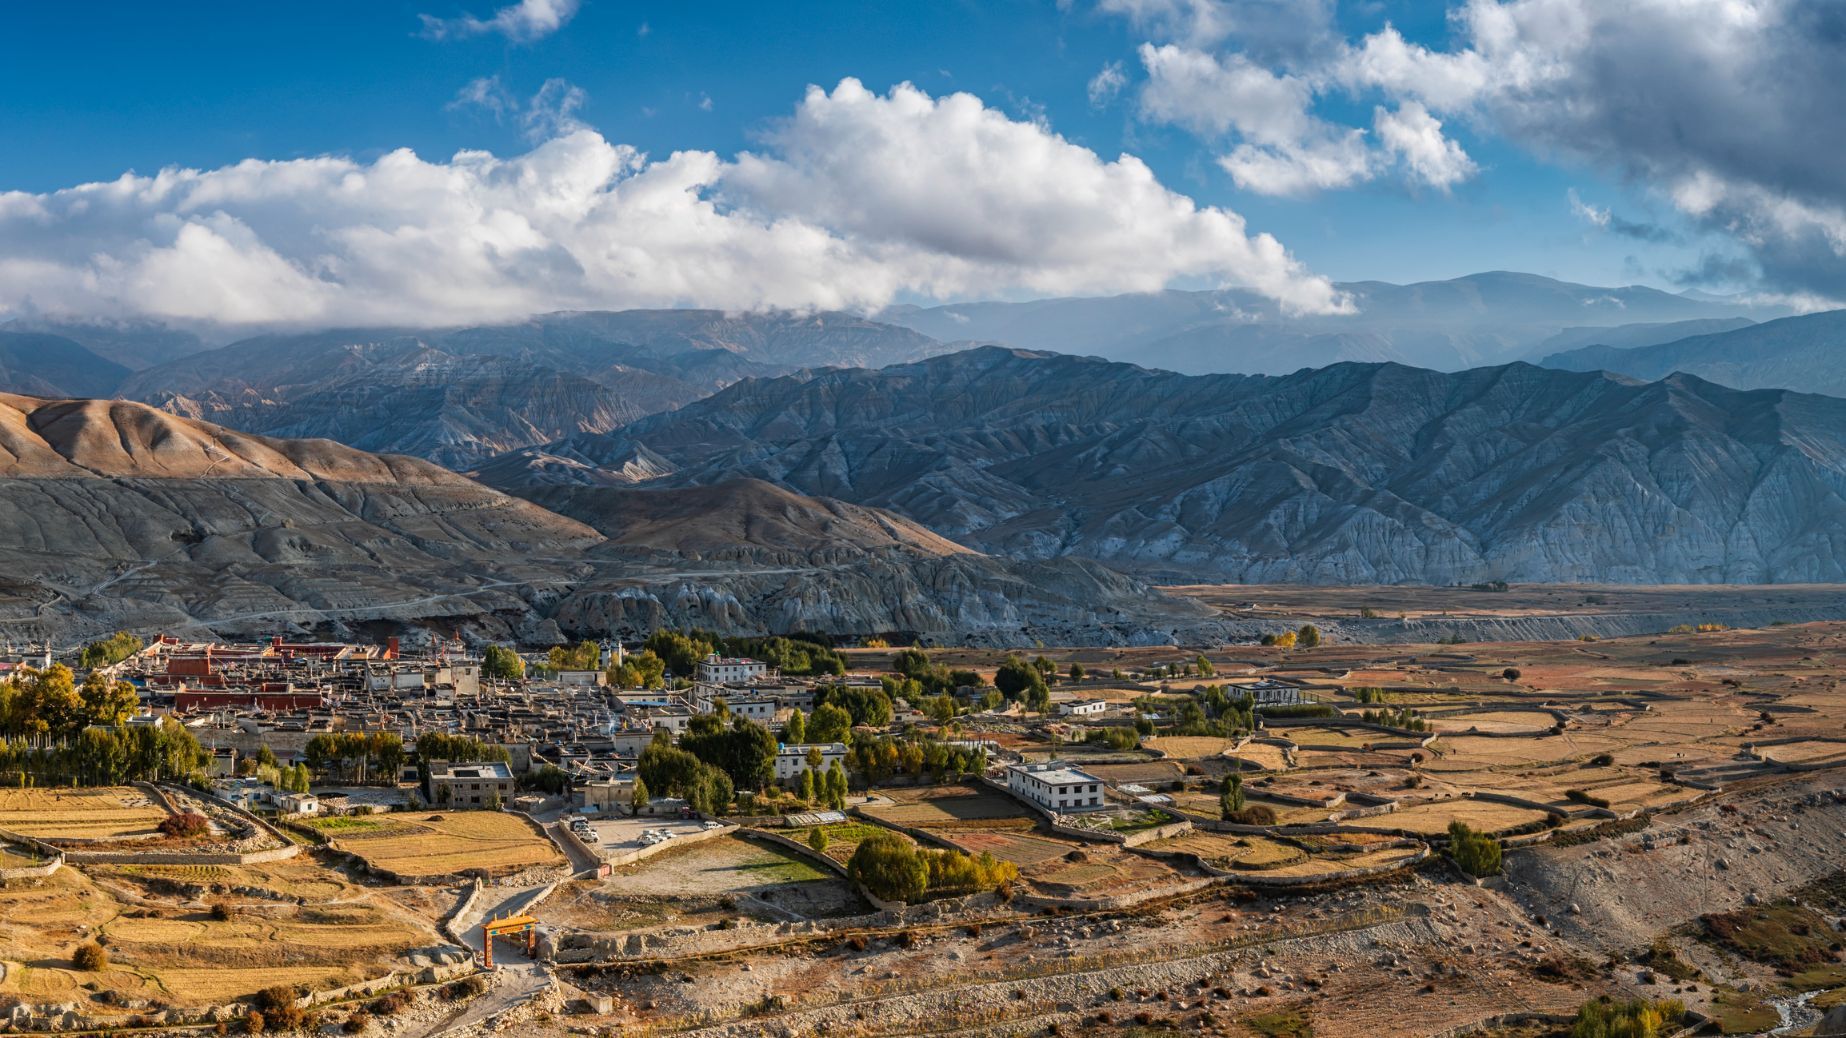 A panoramic view of Lo Manthang, the capital of the Mustang region in the Nepal Himalaya. Photo: Getty